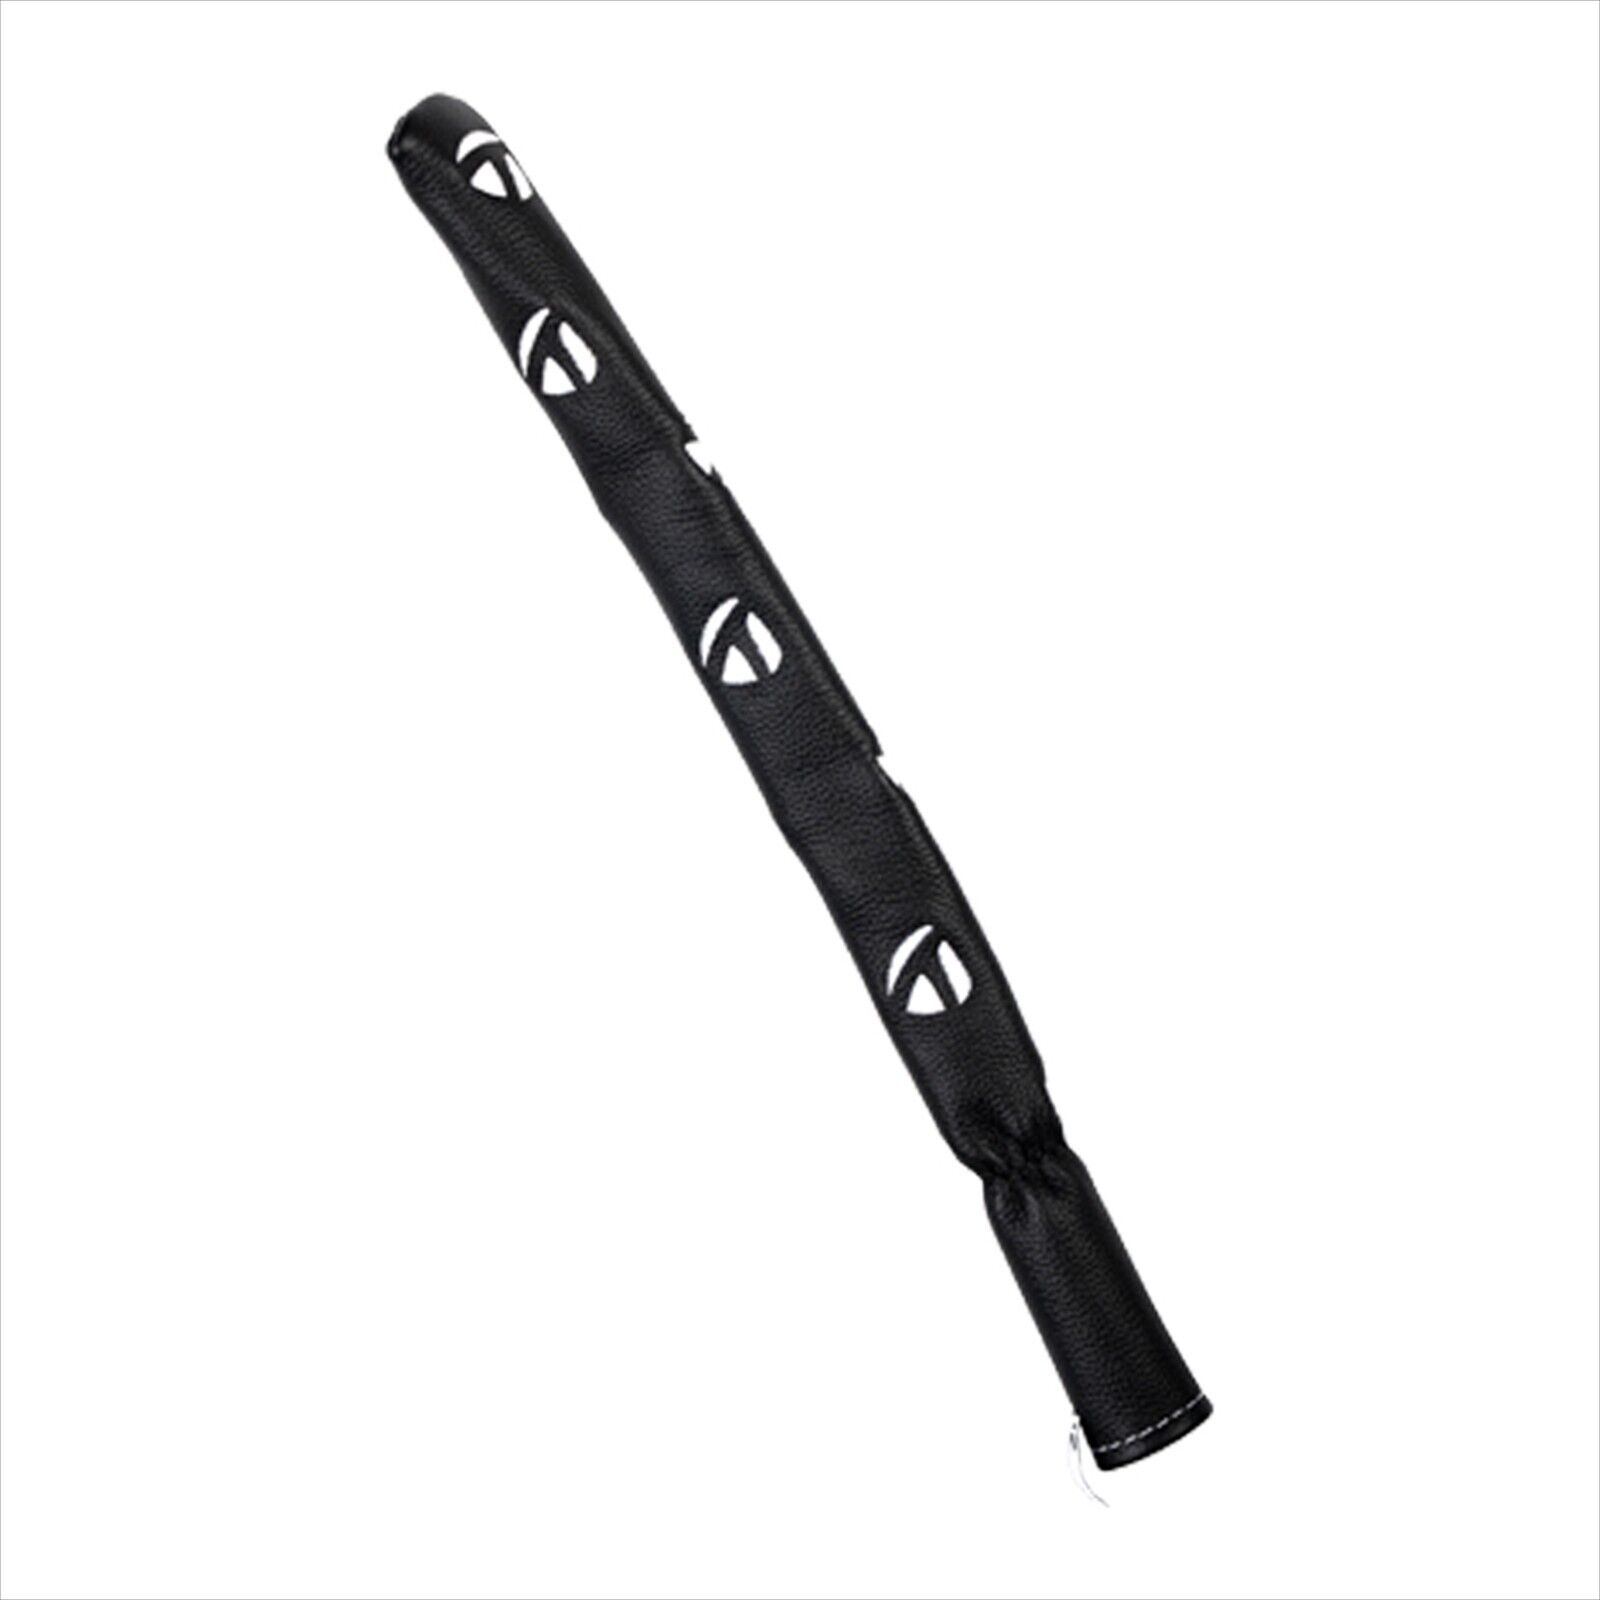 Taylormade Alignment Stick Cover Black